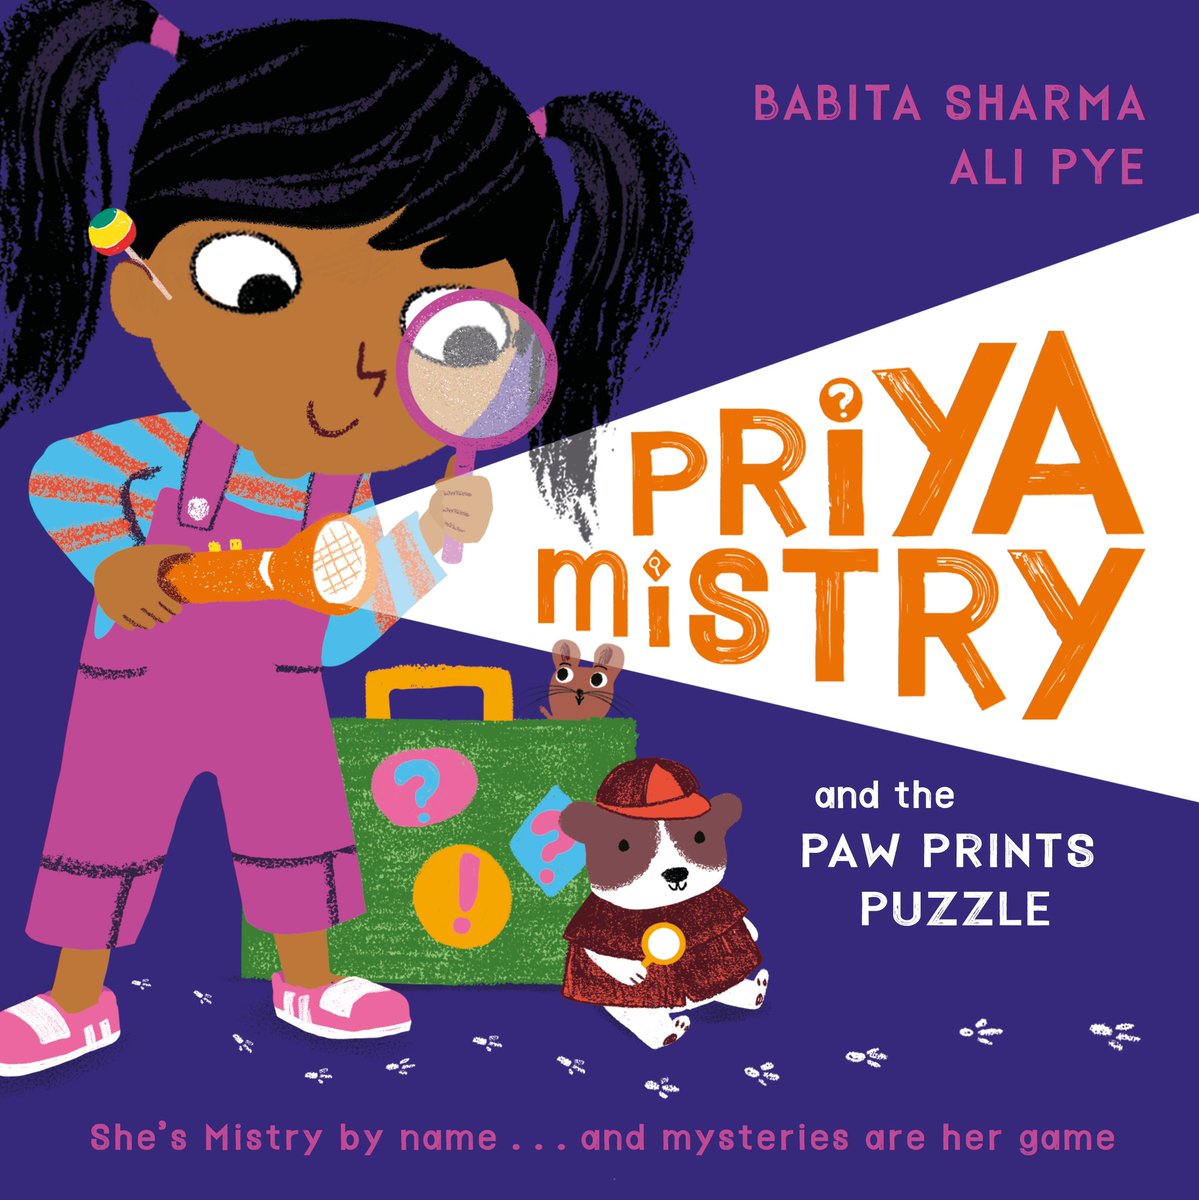 ***NEW CHILDREN’S BOOK*** Three weeks to publication of my new children’s book series! Very excited for you to meet Priya - a cheeky, adventurous, corner shop super sleuth. Priya Mistry and the Paw Prints Puzzle out March 14th. Preorder now: shorturl.at/ruRUZ